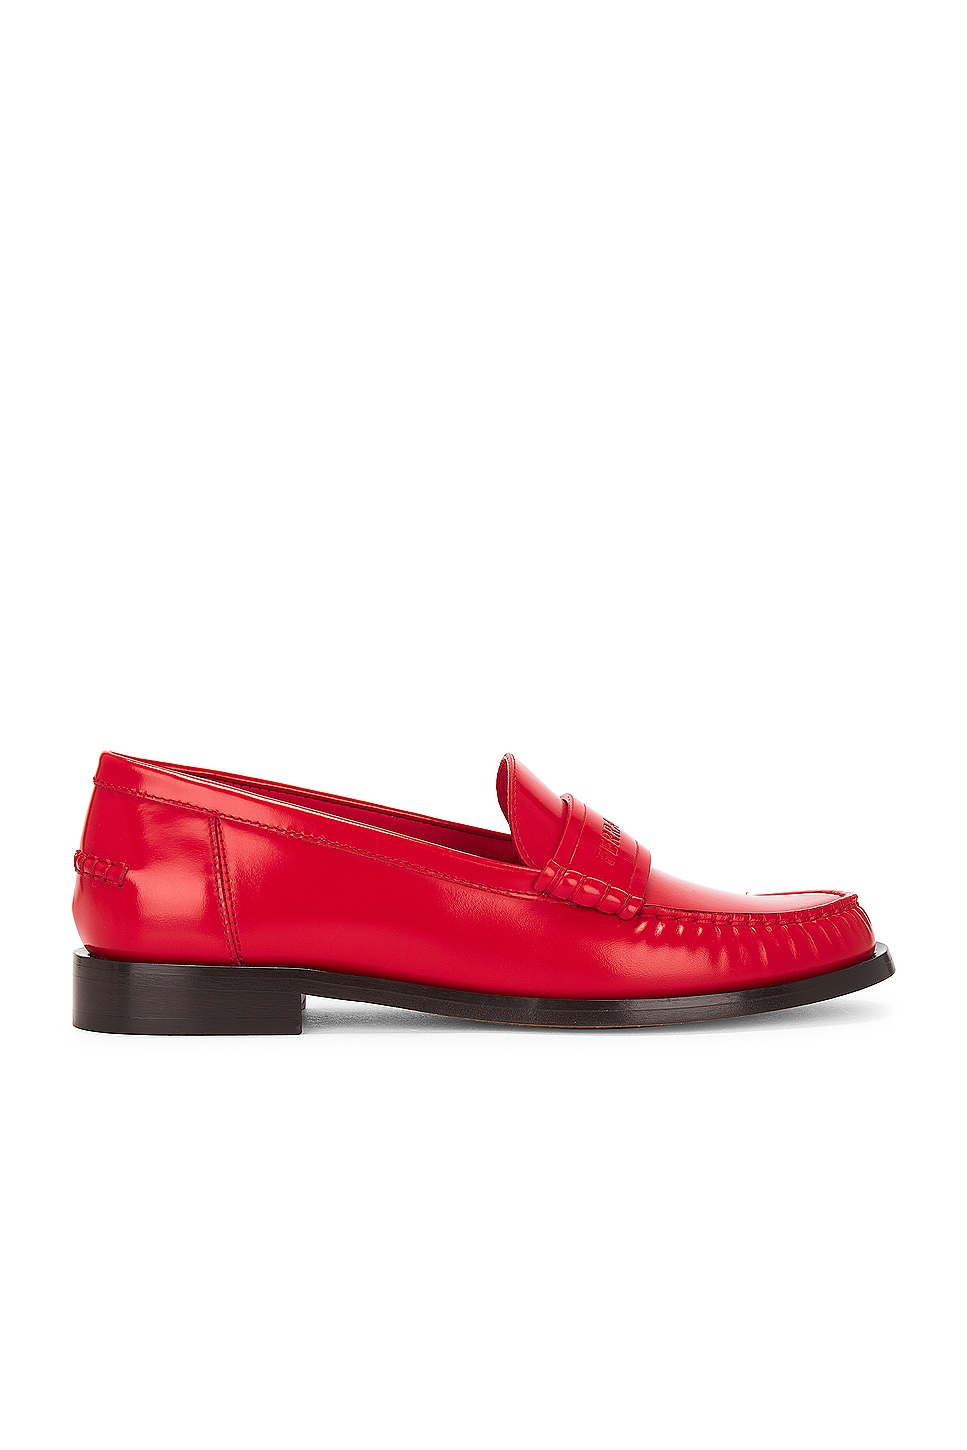 Image 1 of Ferragamo Irina Loafer in Flame Red